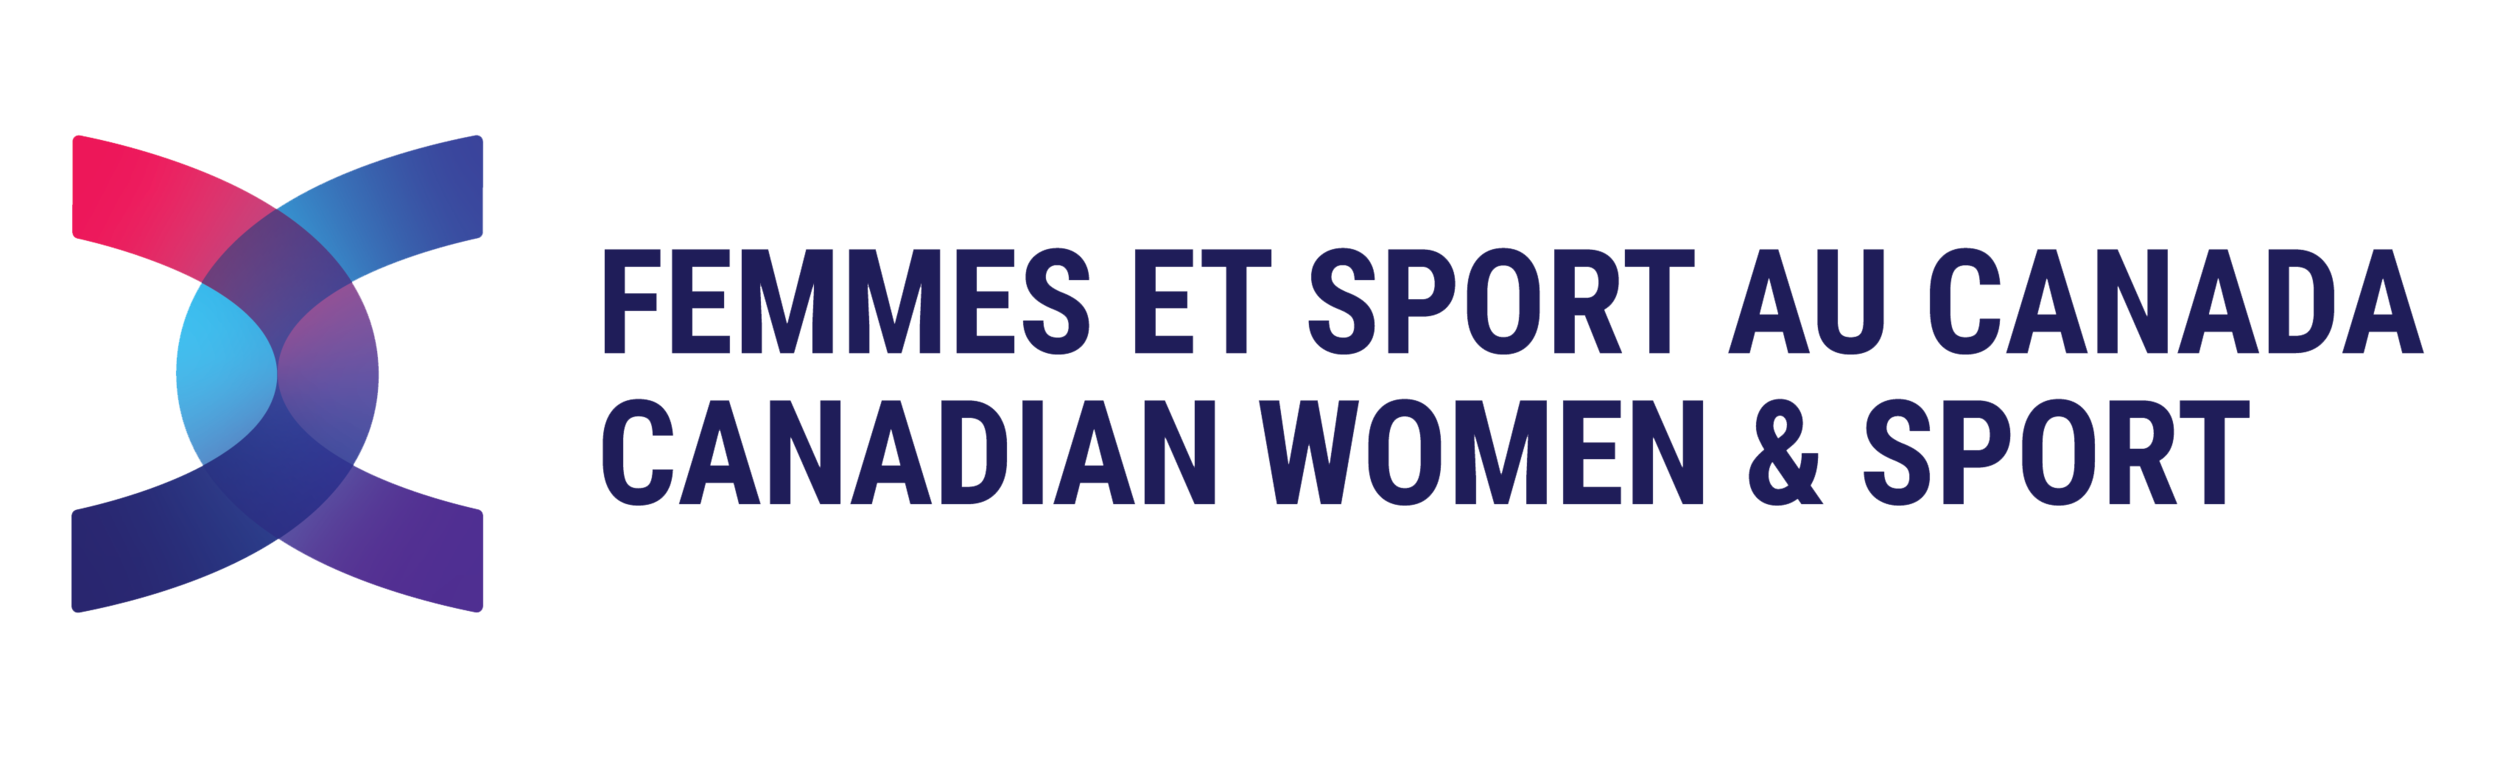 Canadian Women and Sport.png